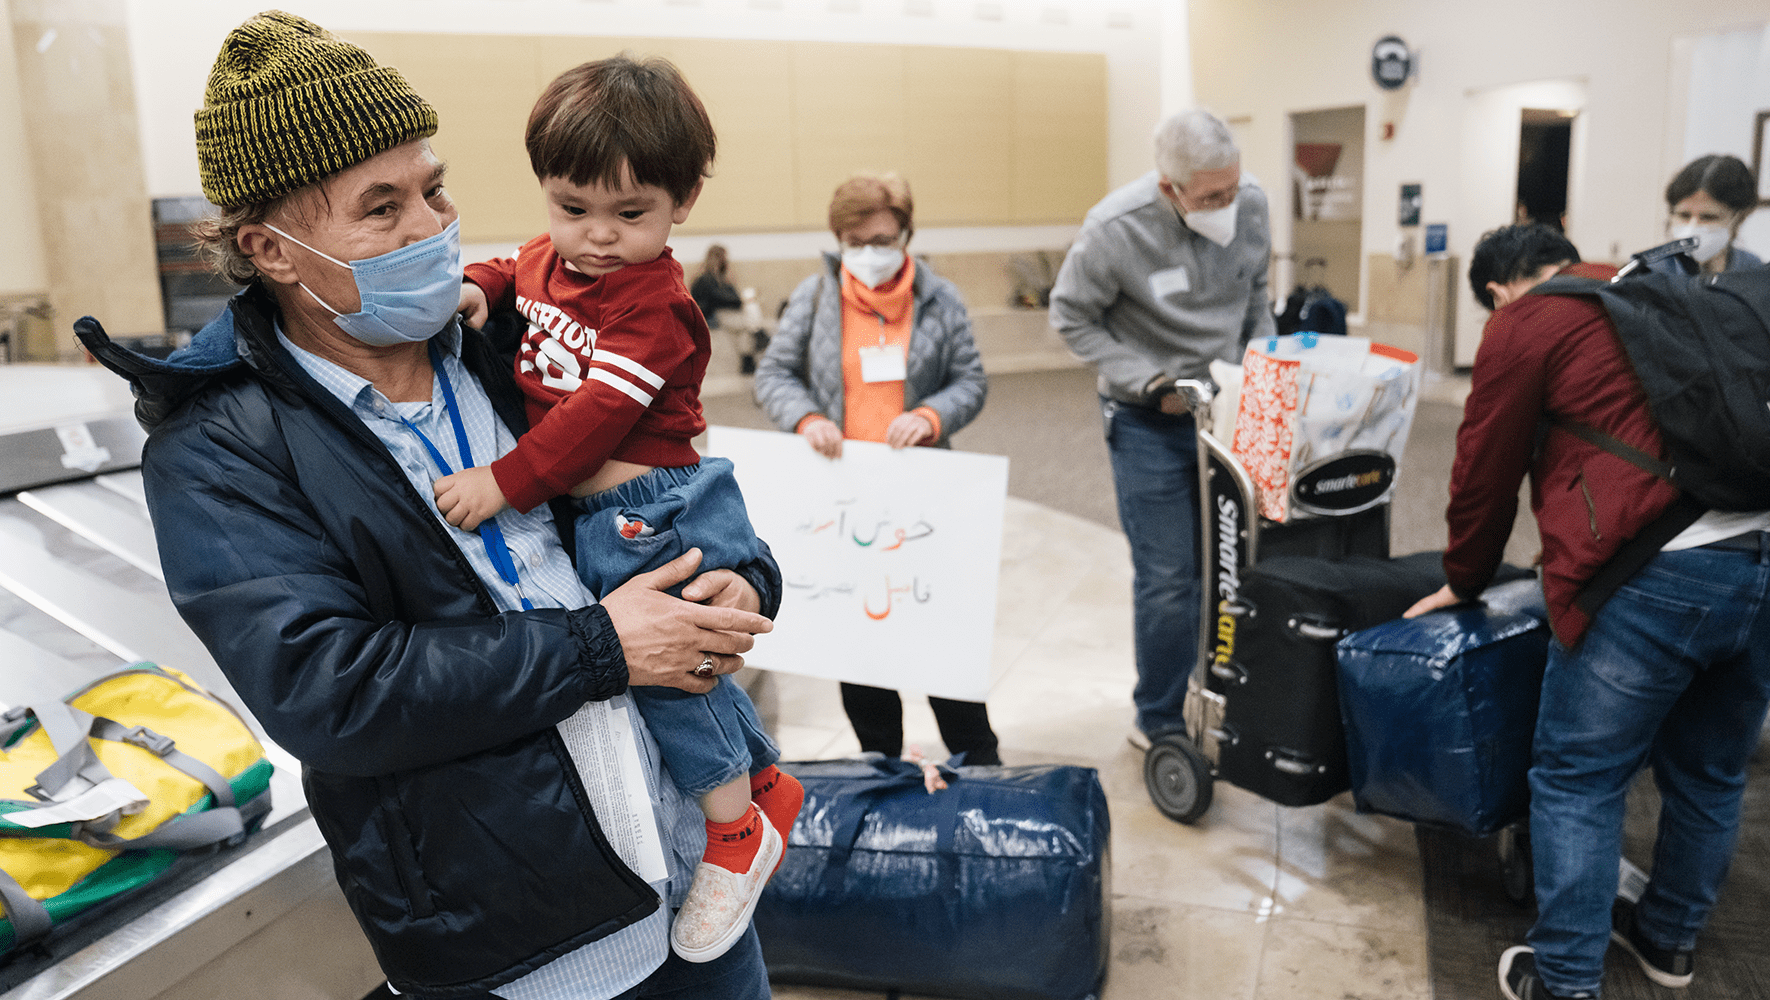 An Afghan man and his son after arrival at the baggage claim of John Wanye Airport in Orange County, Feb 19, 2022. They were greeted by a group of Welcome Circle volunteers. (Eric Thayer for HIAS)